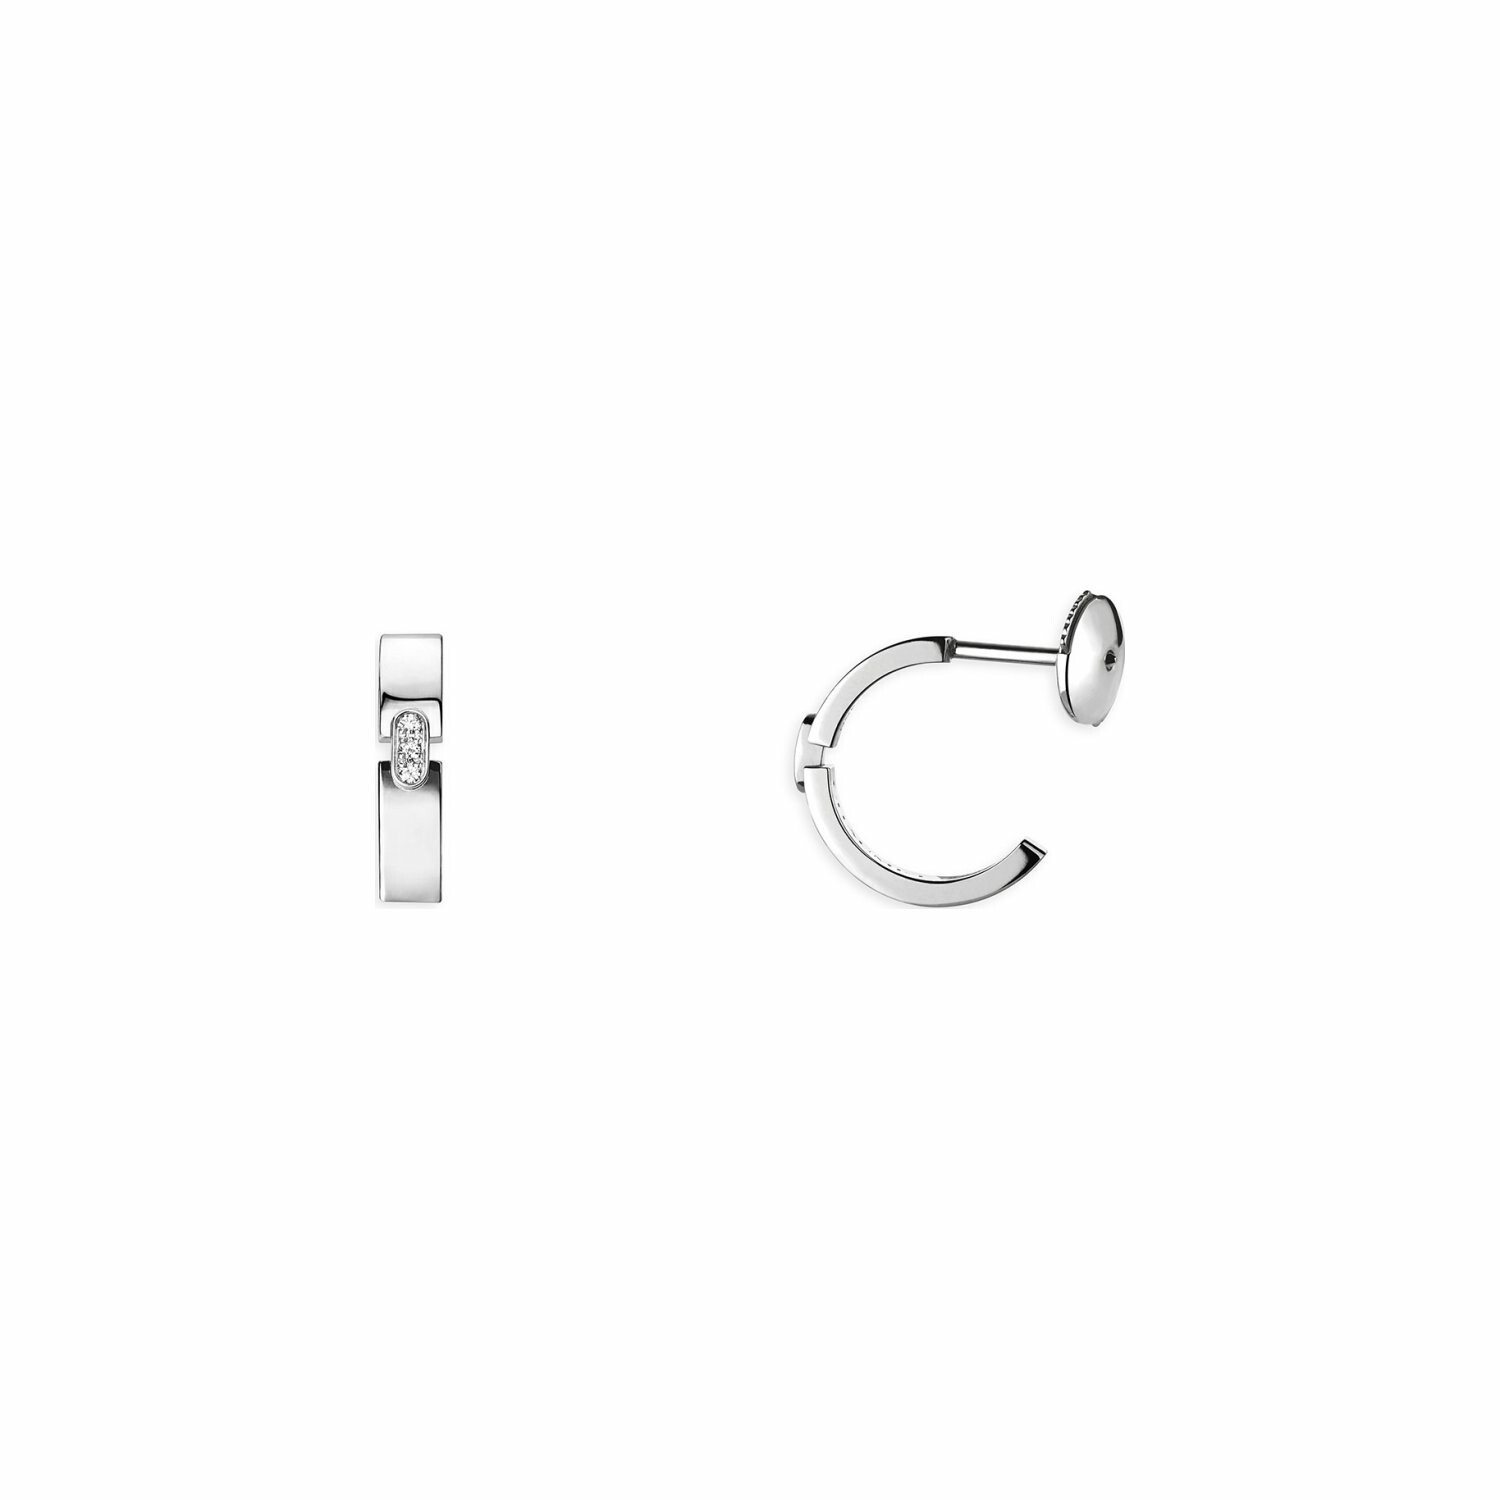 Purchase Chaumet Liens Evidence earrings, white gold, diamonds